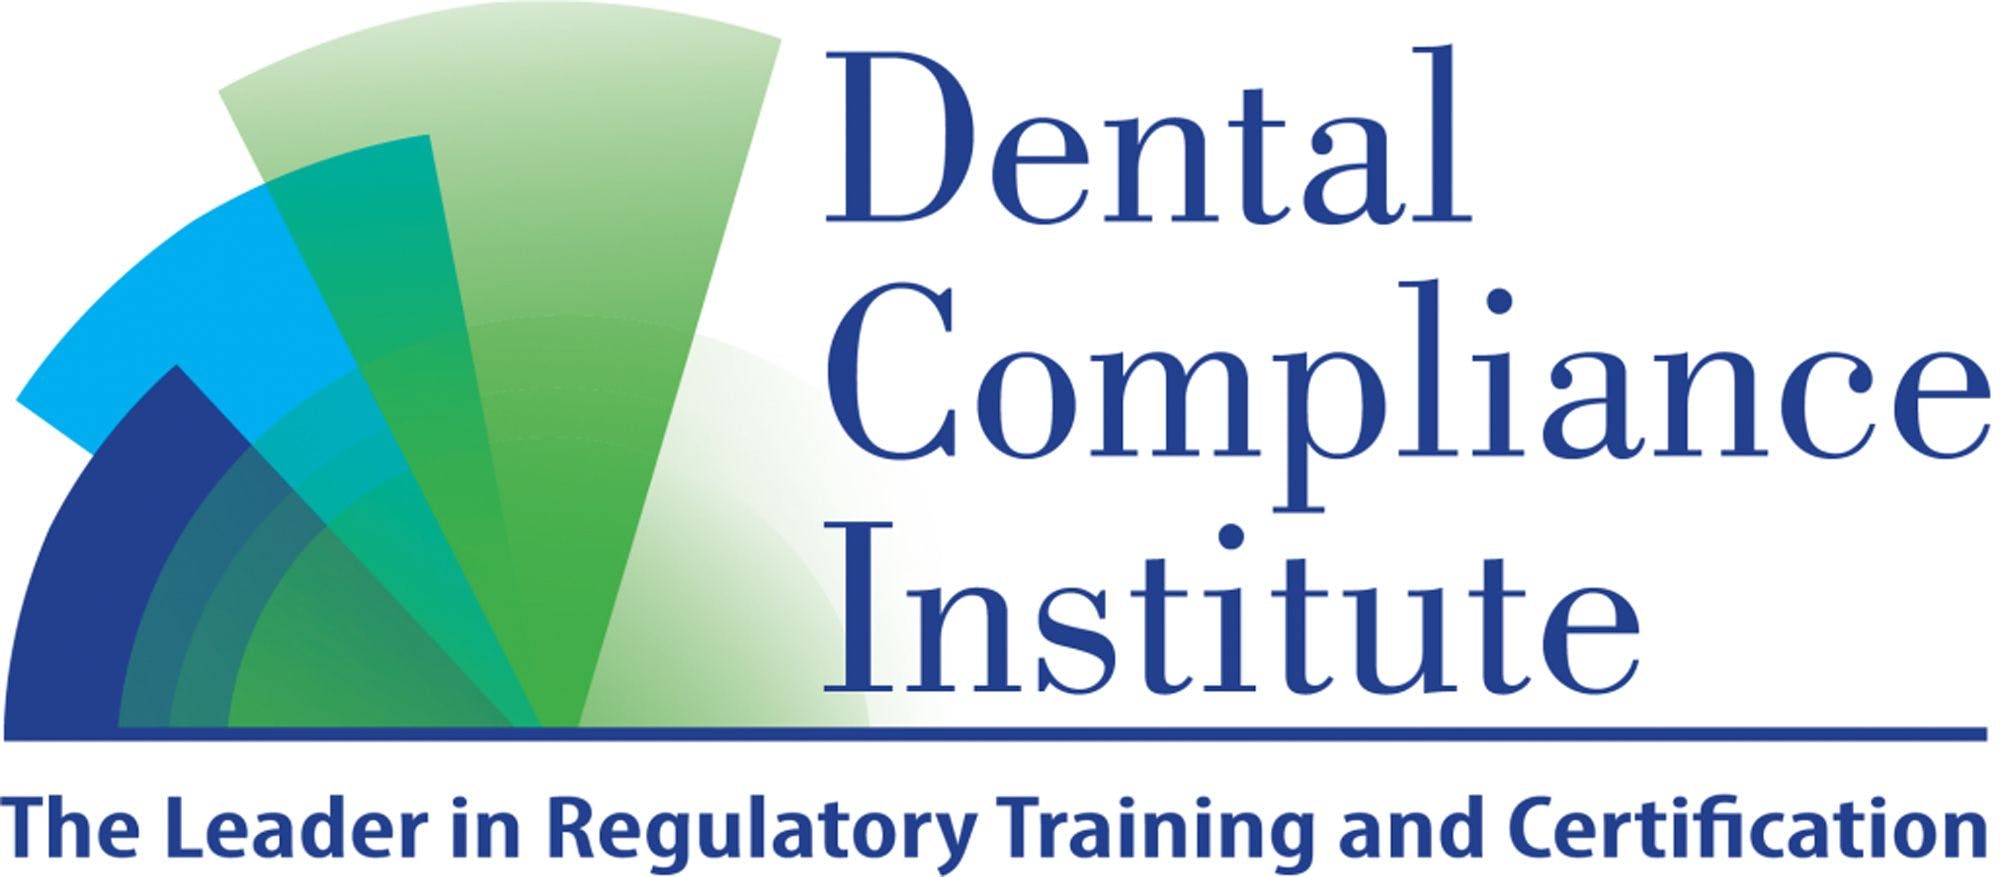 The Dental Compliance Institute to Host First Annual State of Compliance Address